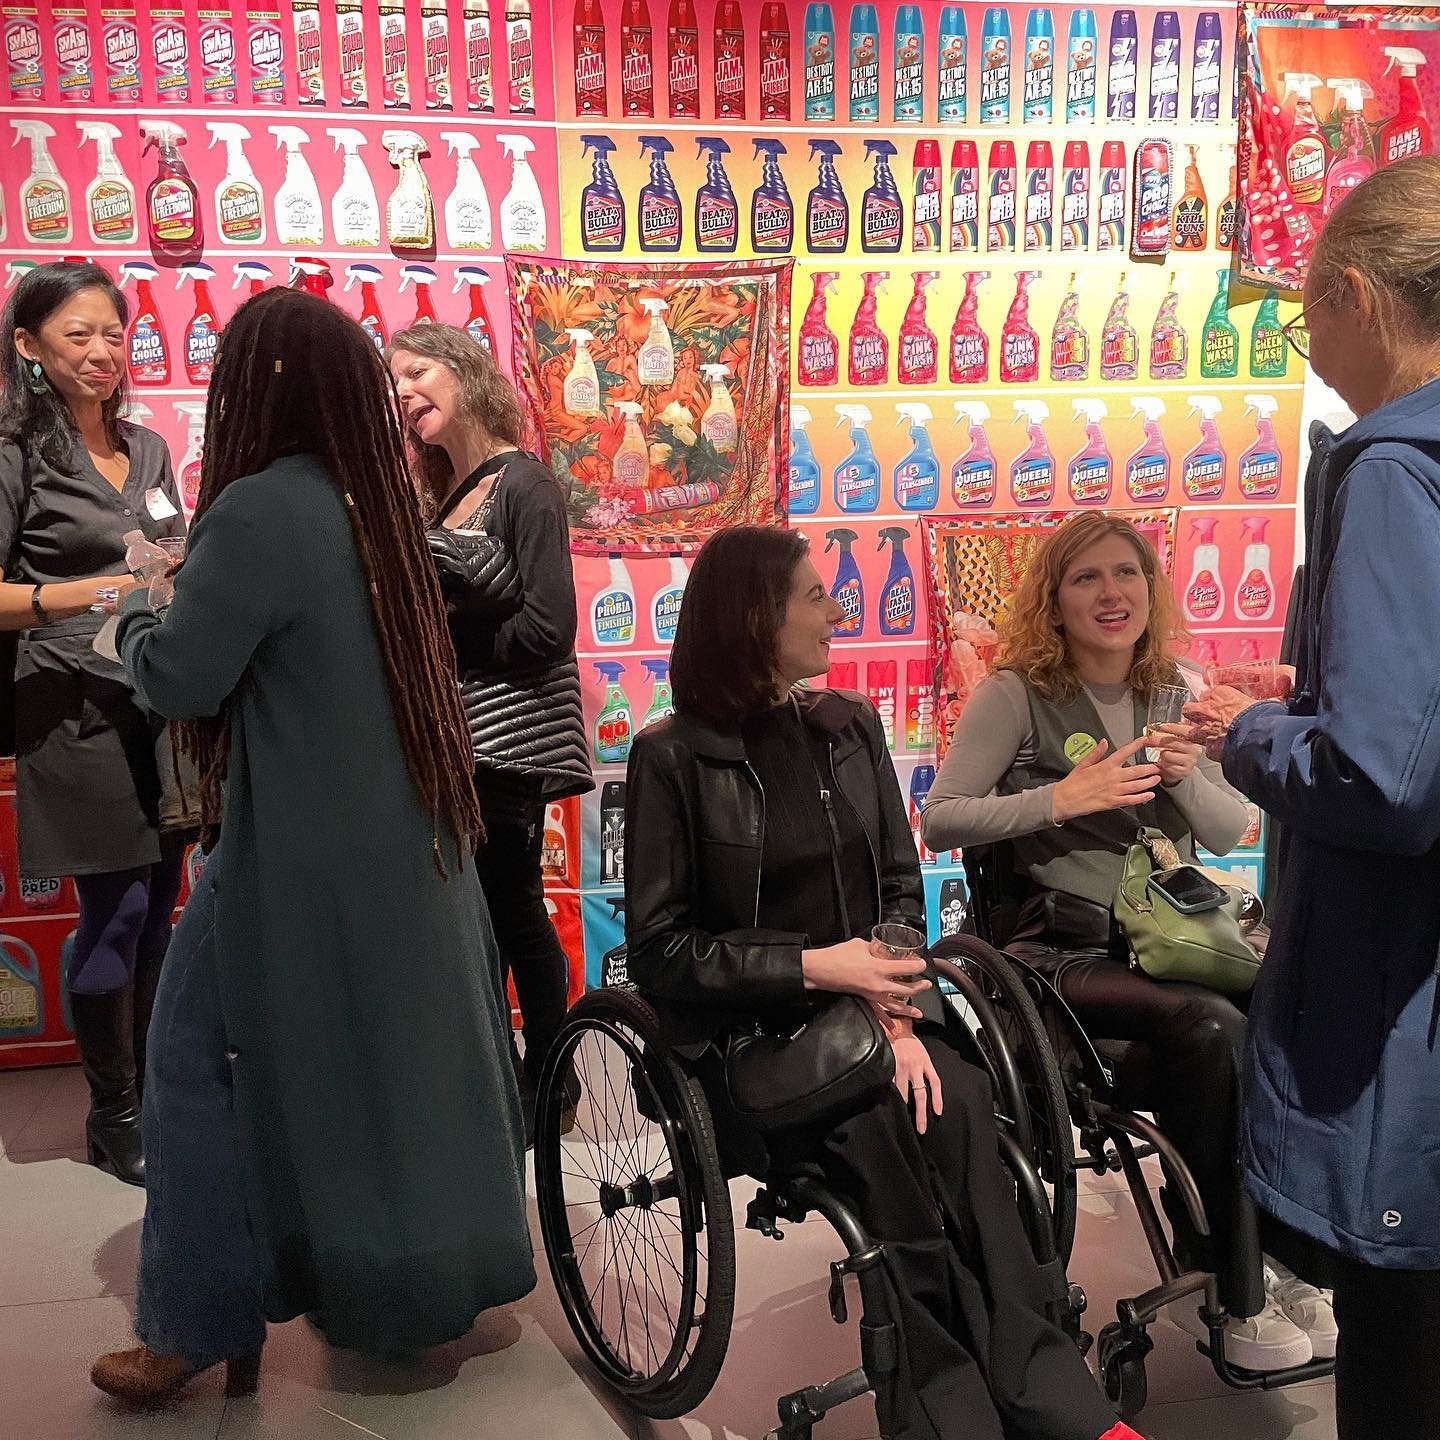 Lovely people and role models at the&nbsp;@reproductiveaccess&nbsp;with&nbsp;@cd_clifford, @longwinded_, @yolandeh1 @dianajensen_art_official, @nightmariusz and the RHAP-crew at Art 7 Access, a night of connection and conversation about sexual and re